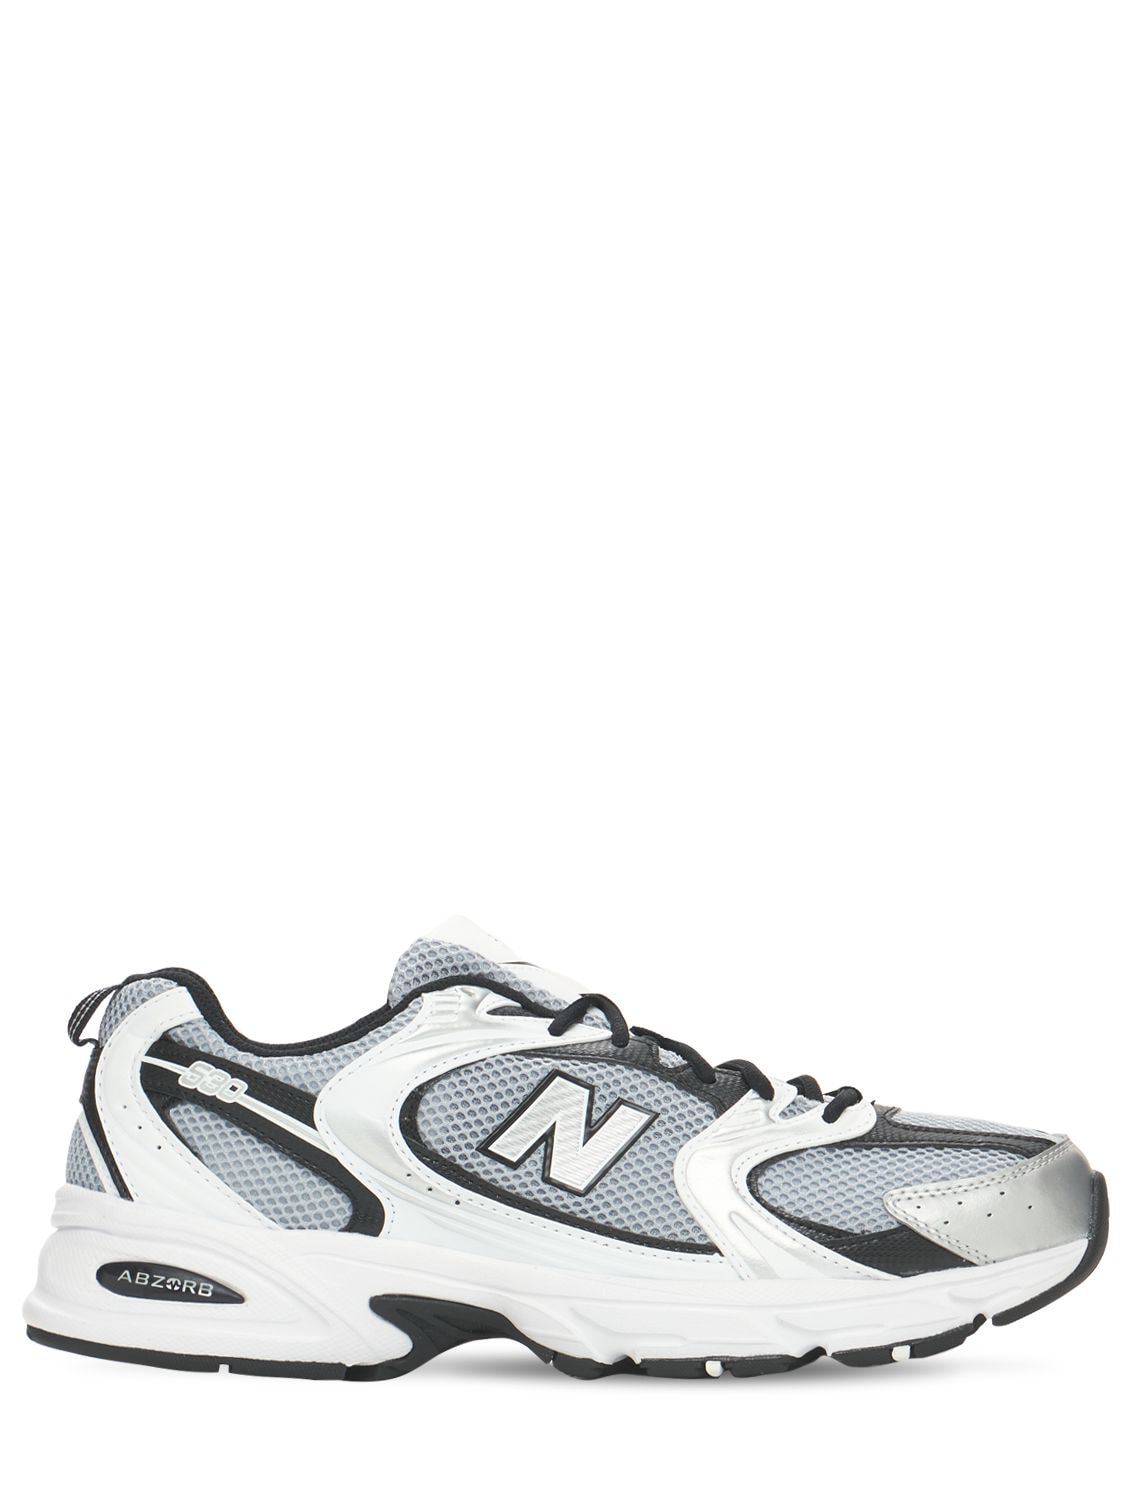 New Balance 530 Sneakers In Silver,black